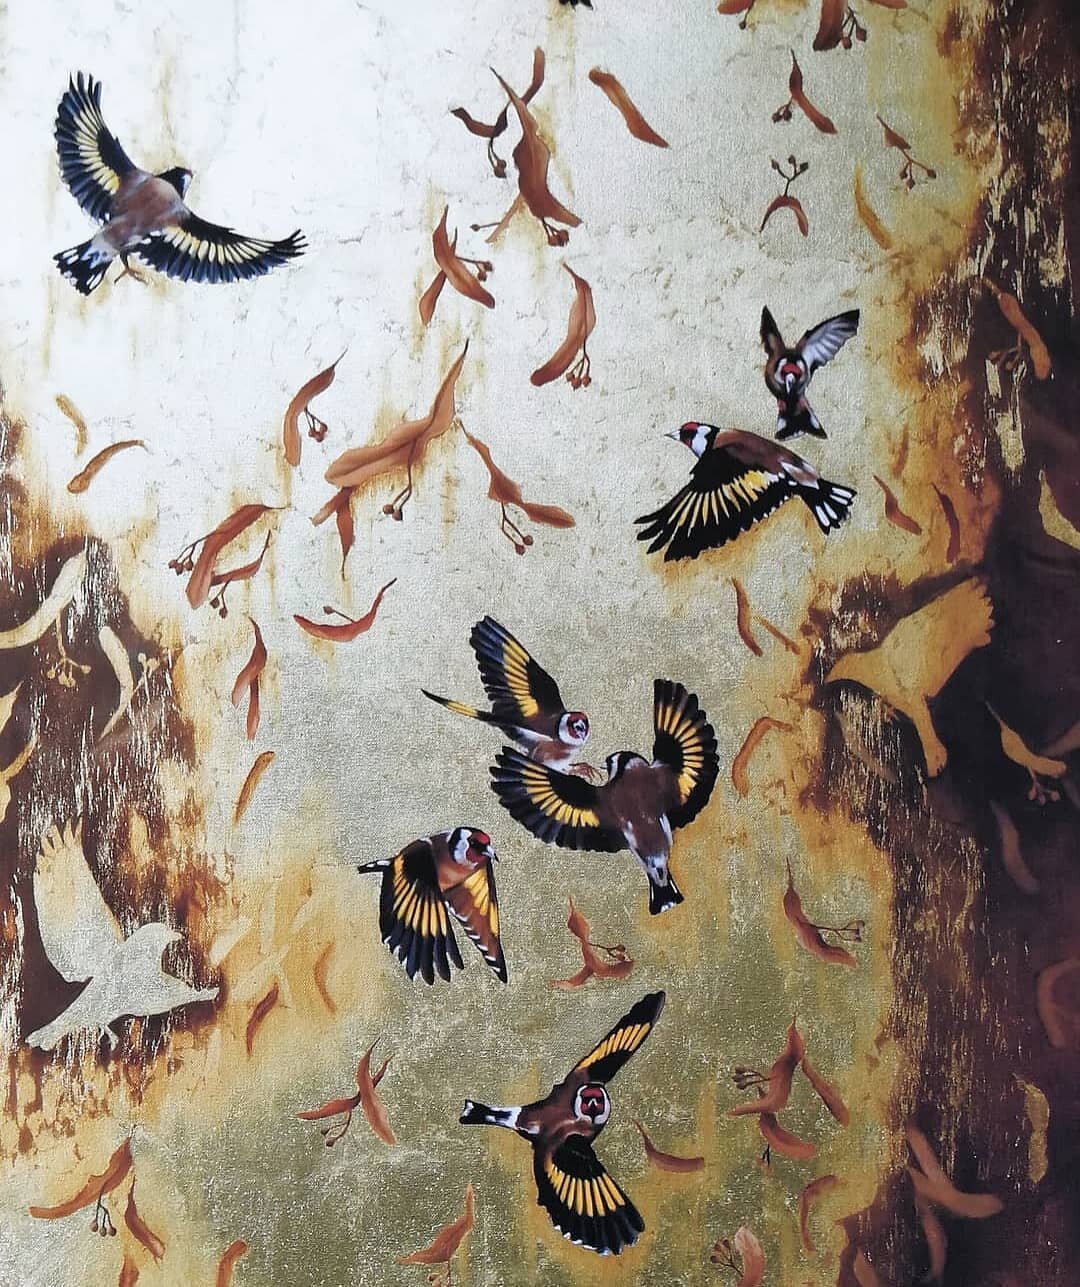 A detail from an old painting featuring goldfinches and falling leaves.

#art #painting #oilpainting #oils #originalart #wildlifeart #wildlifeartist #natureart #birdart #birdsofinstagram #chinoiserie #goldleaf #gold #fallingleaves #goldfinches #commi